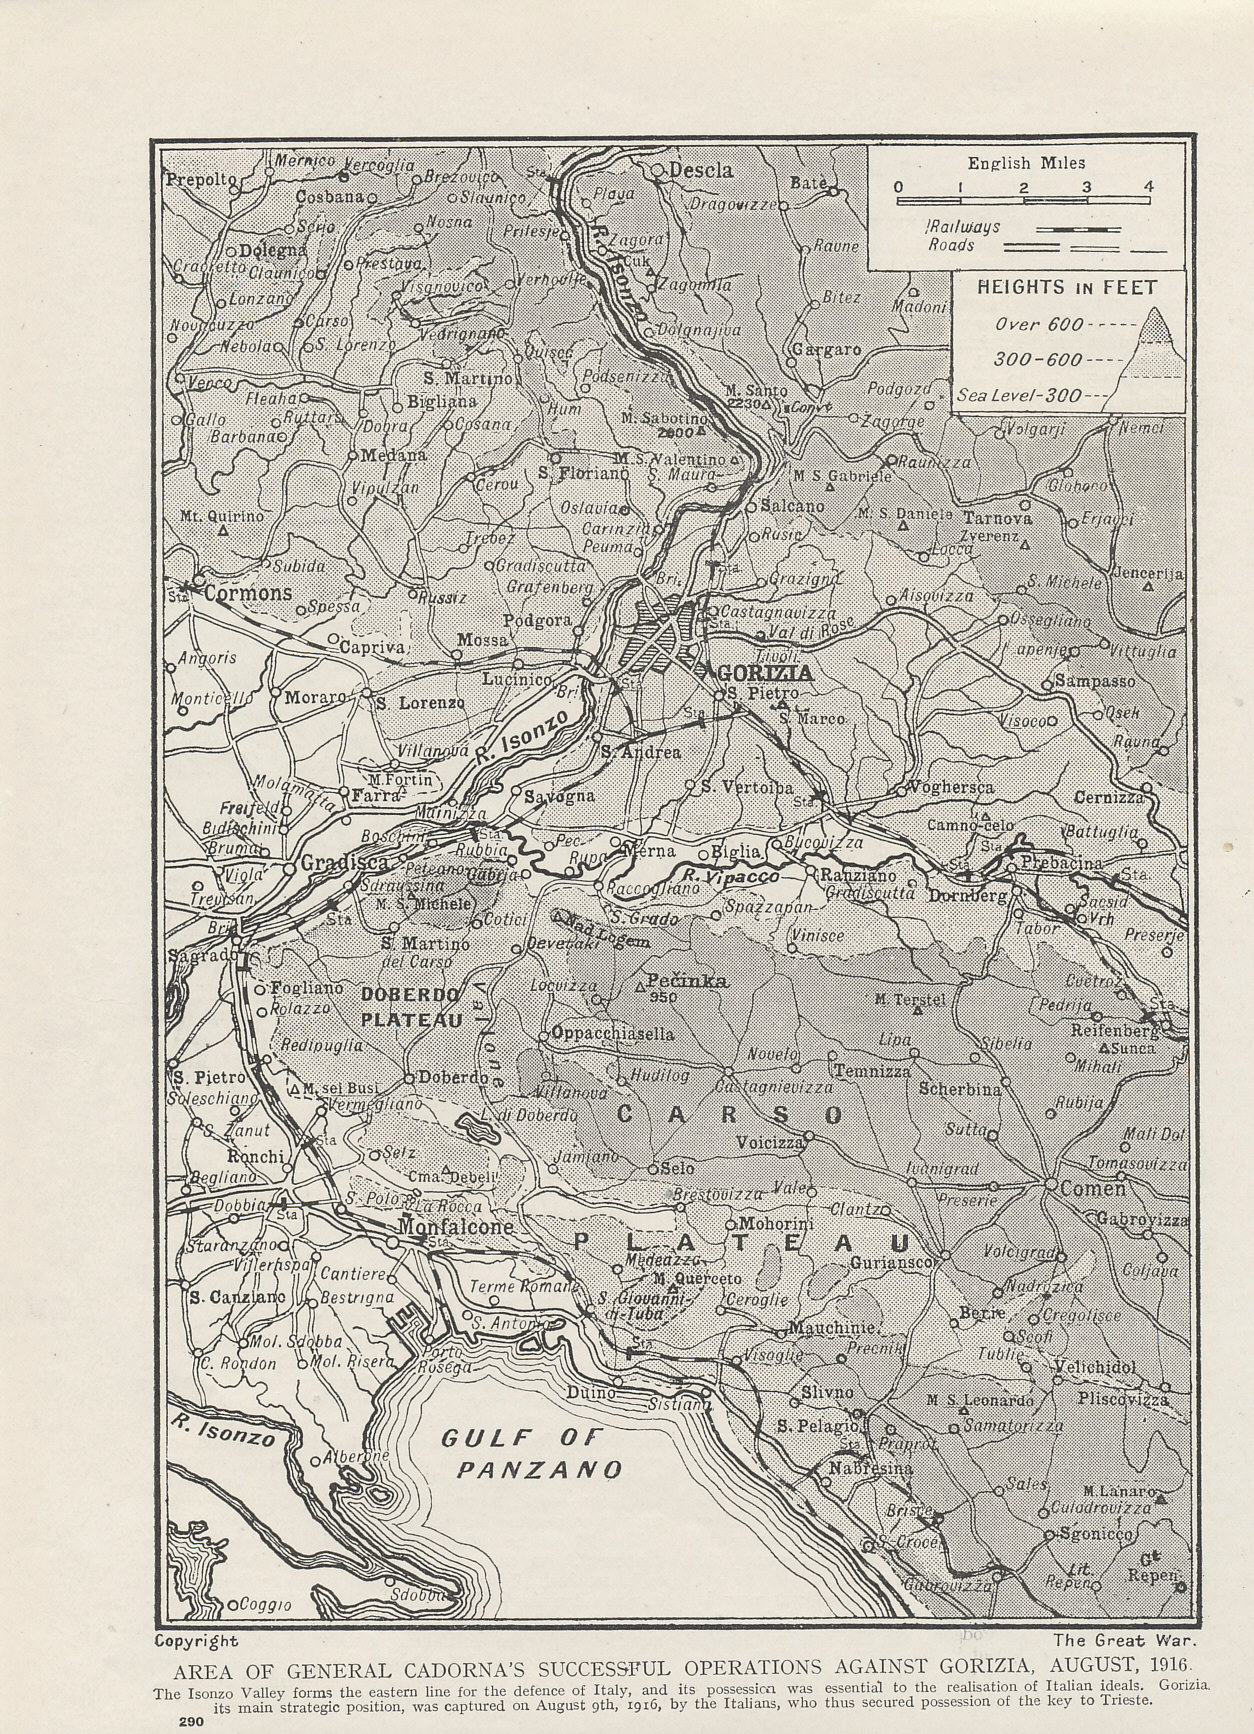 From a series on the Great War, a 1916 map on the the Sixth Battle of the Isonzo, Italian commander Luigi Cadorna's offensive in August of the same year. The Italians crossed much of the Isonzo, and took Gorizia. The Austro-Hungarians continued to hold high ground to the east. 
Map labels include:
River Isonzo, Gorizia, Doberdo Plateau, Carso Plateau, Gradisca, Monfalcone, Gulf of Panzano
Text:
Area of General Cadorna's successful operations against Gorizia, August 1916. The Isonzo Valley forms the eastern line for the defense of Italy, and its possession was essential to the realization of Italian ideals. Gorizia, its main strategic position, was captured on August 9th, 1916, by the Italians, who thus secured possession of the key to Trieste.